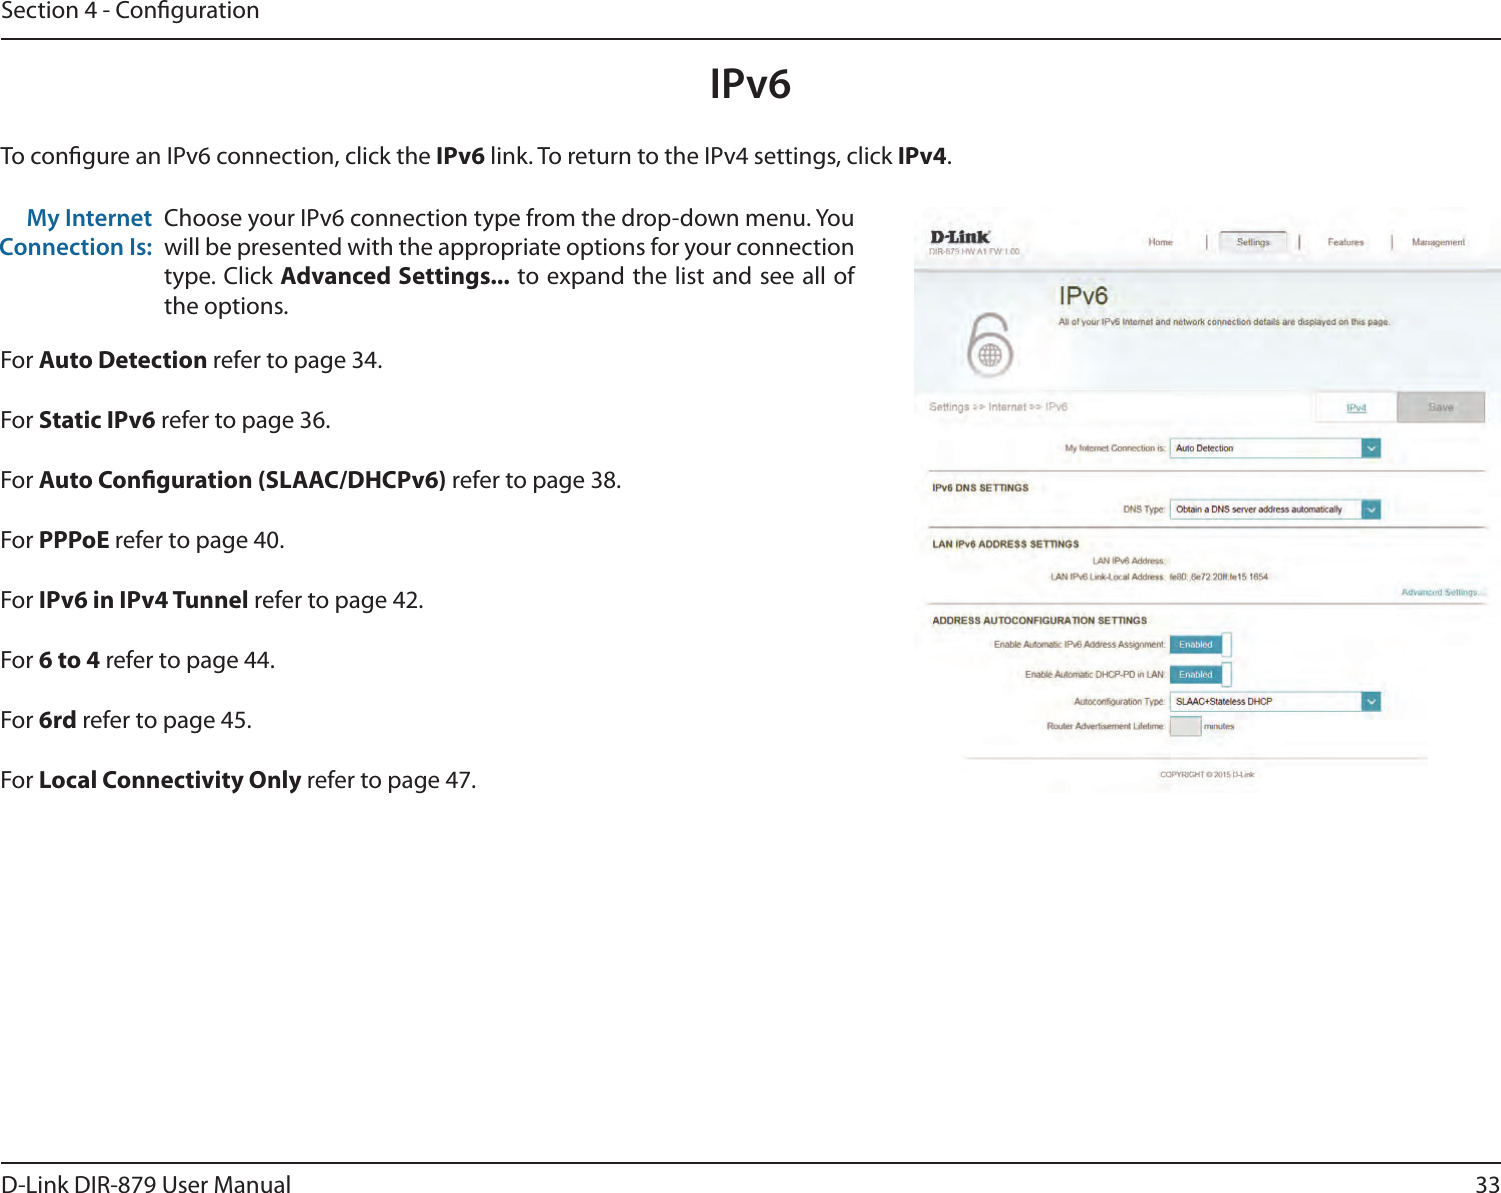 33D-Link DIR-879 User ManualSection 4 - CongurationIPv6To congure an IPv6 connection, click the IPv6 link. To return to the IPv4 settings, click IPv4.Choose your IPv6 connection type from the drop-down menu. You will be presented with the appropriate options for your connection type. Click Advanced Settings... to expand the list and see all of the options.My Internet Connection Is:For Auto Detection refer to page 34.For Static IPv6 refer to page 36.For Auto Conguration (SLAAC/DHCPv6) refer to page 38.For PPPoE refer to page 40.For IPv6 in IPv4 Tunnel refer to page 42.For 6 to 4 refer to page 44.For 6rd refer to page 45.For Local Connectivity Only refer to page 47.